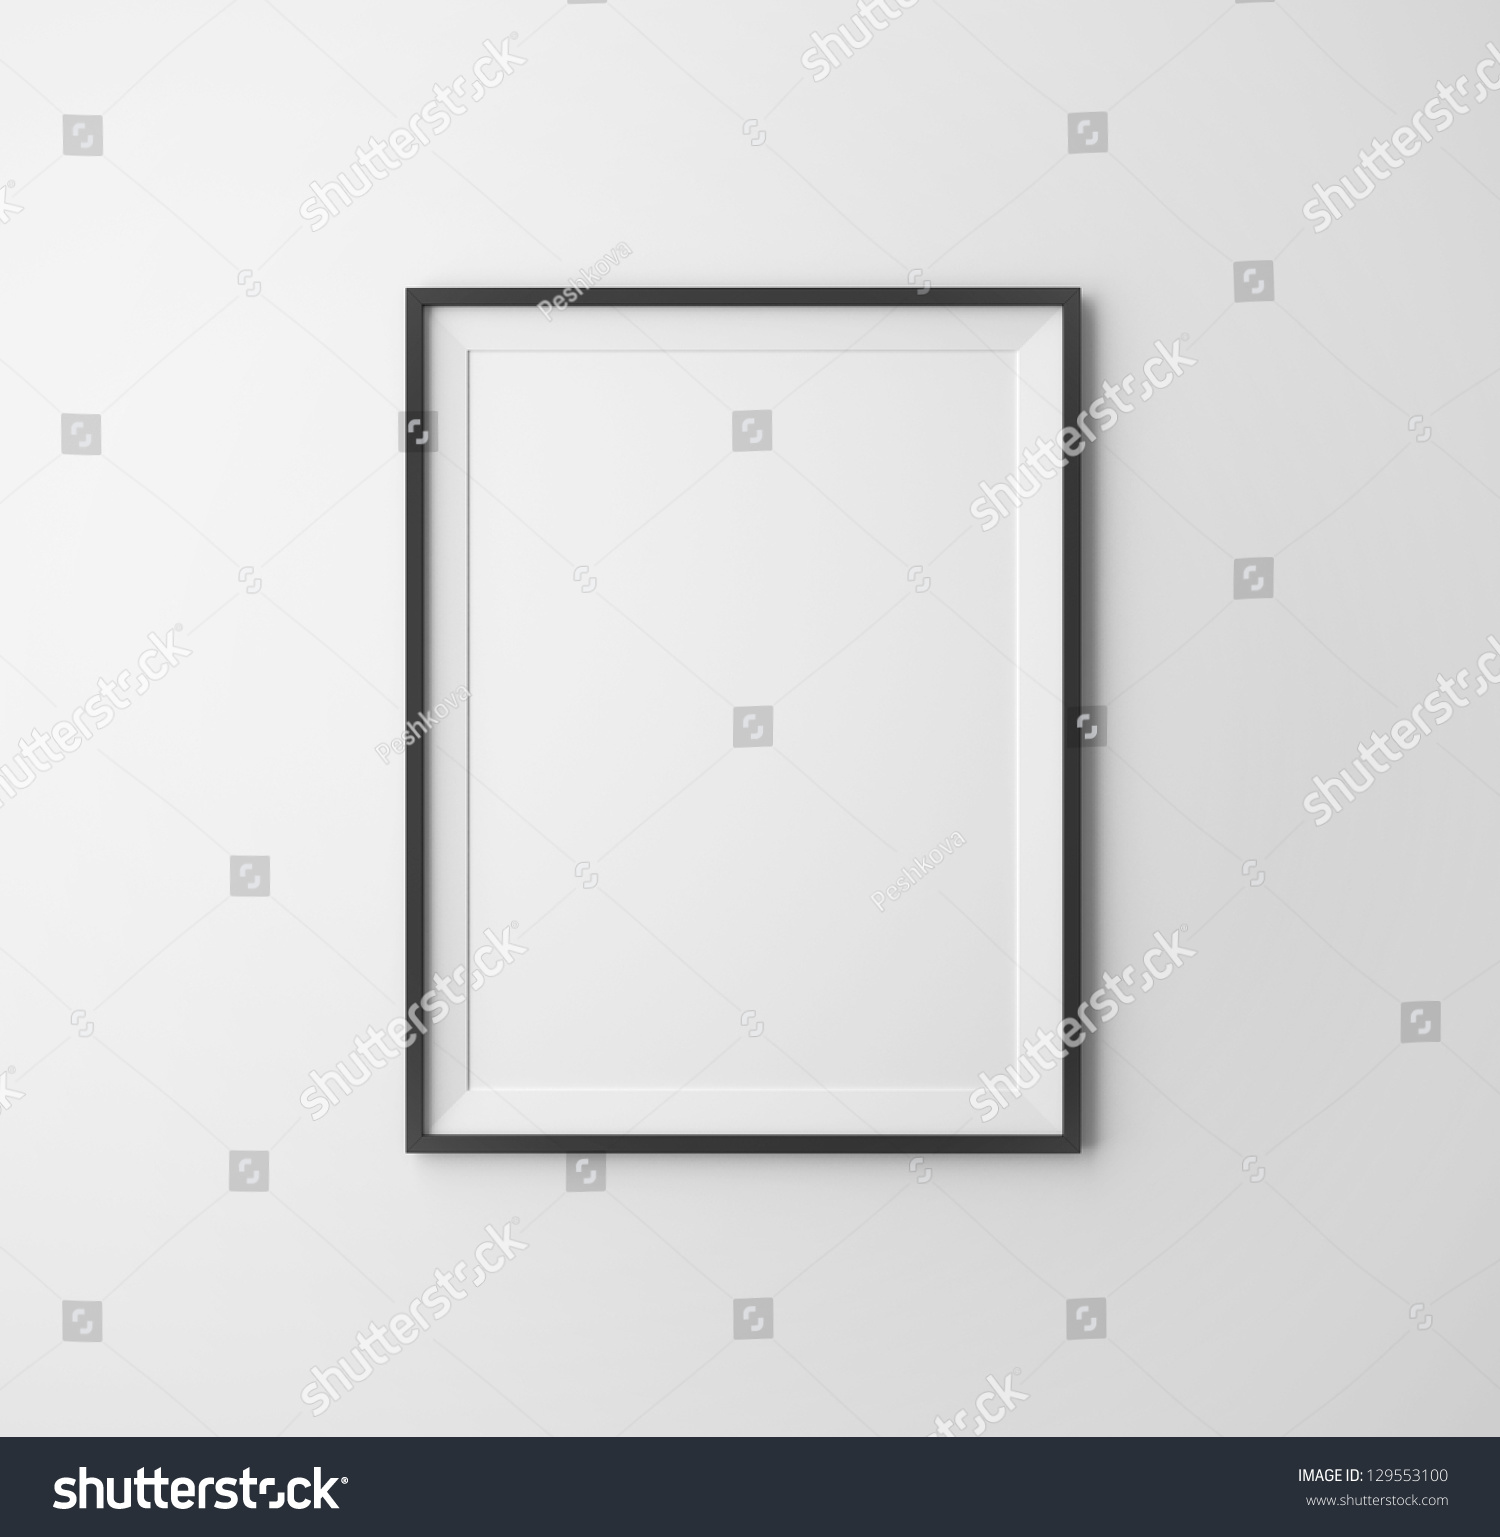 blank frame on a white background #129553100